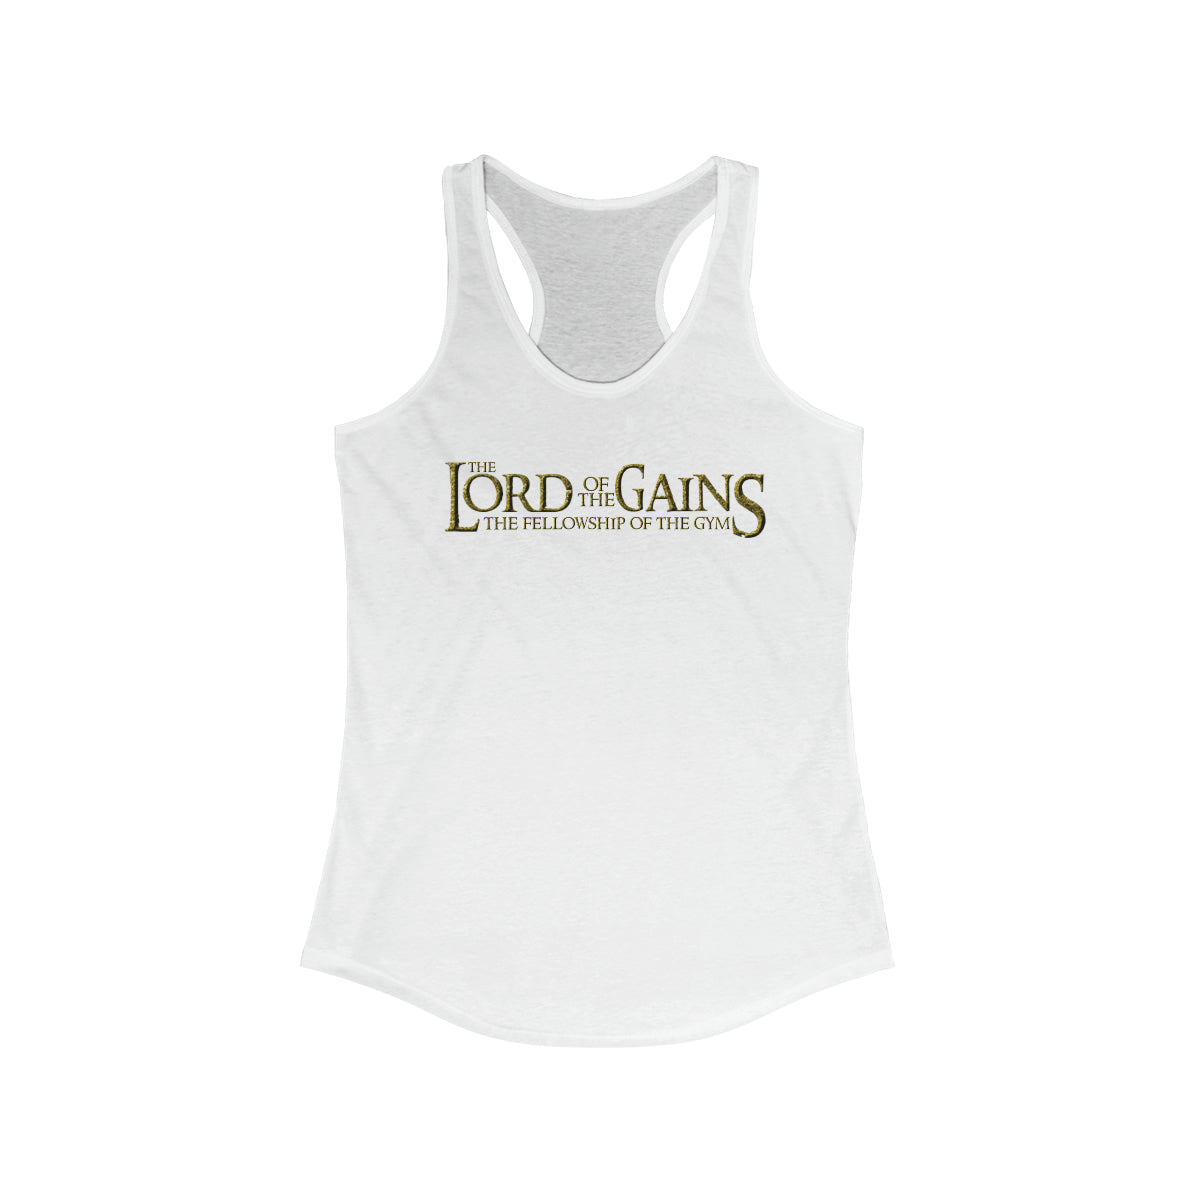 Lord of the Gains Women's Racerback